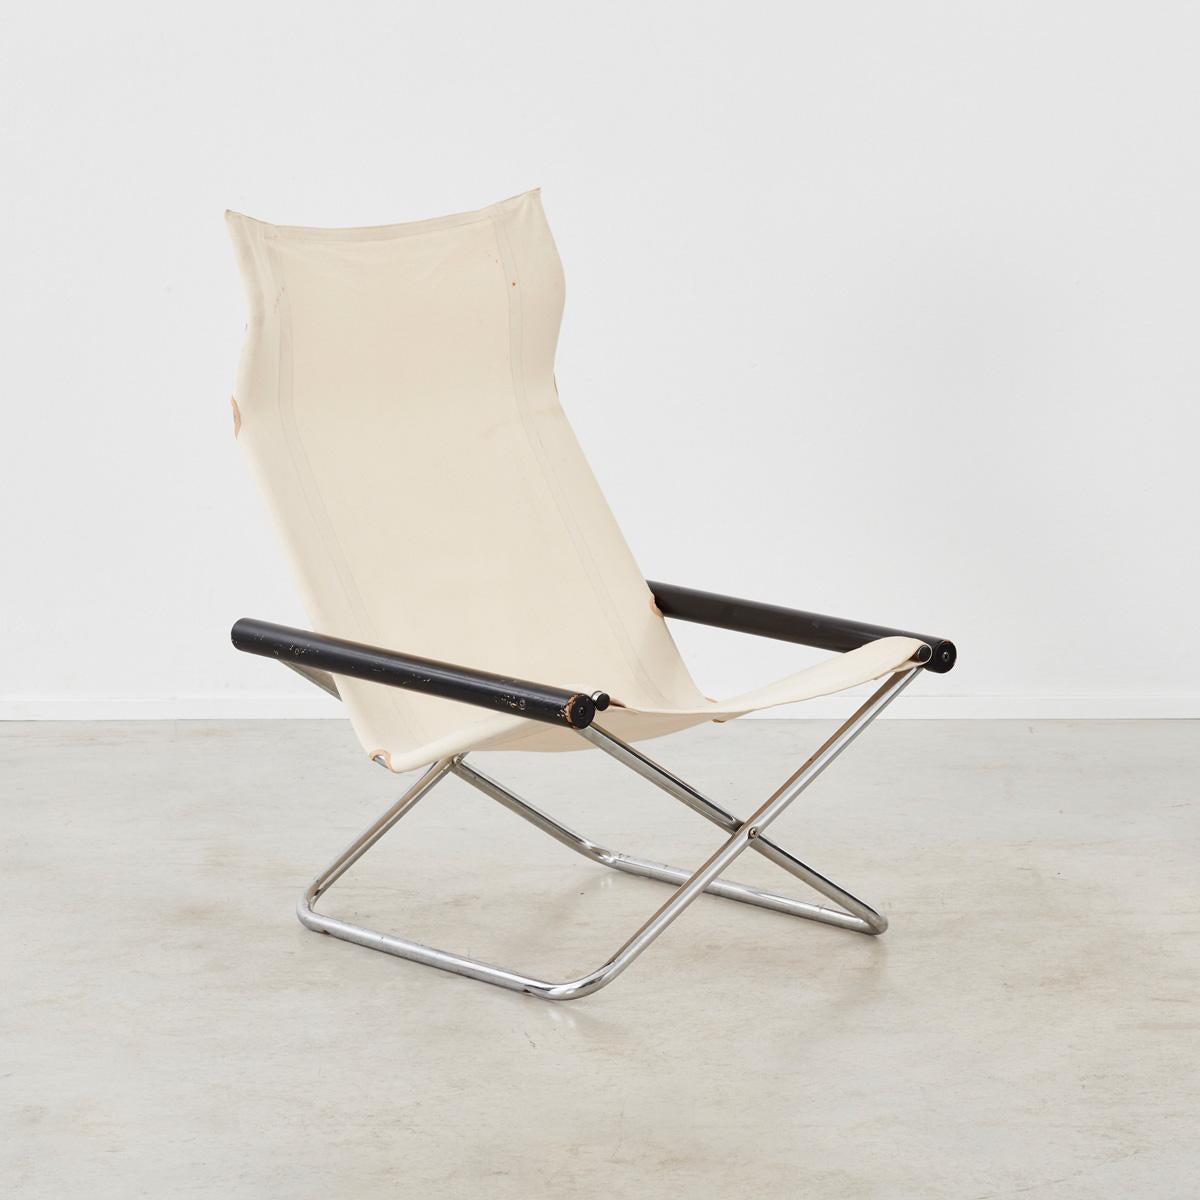 A winner of several design awards and a permanent part of the collection of MoMA, the ‘NY’ chair is a highly esteemed example of modern design. Created in 1958 by Japanese designer Takeshi Nii (1920-2007), the format of the chair was inspired by